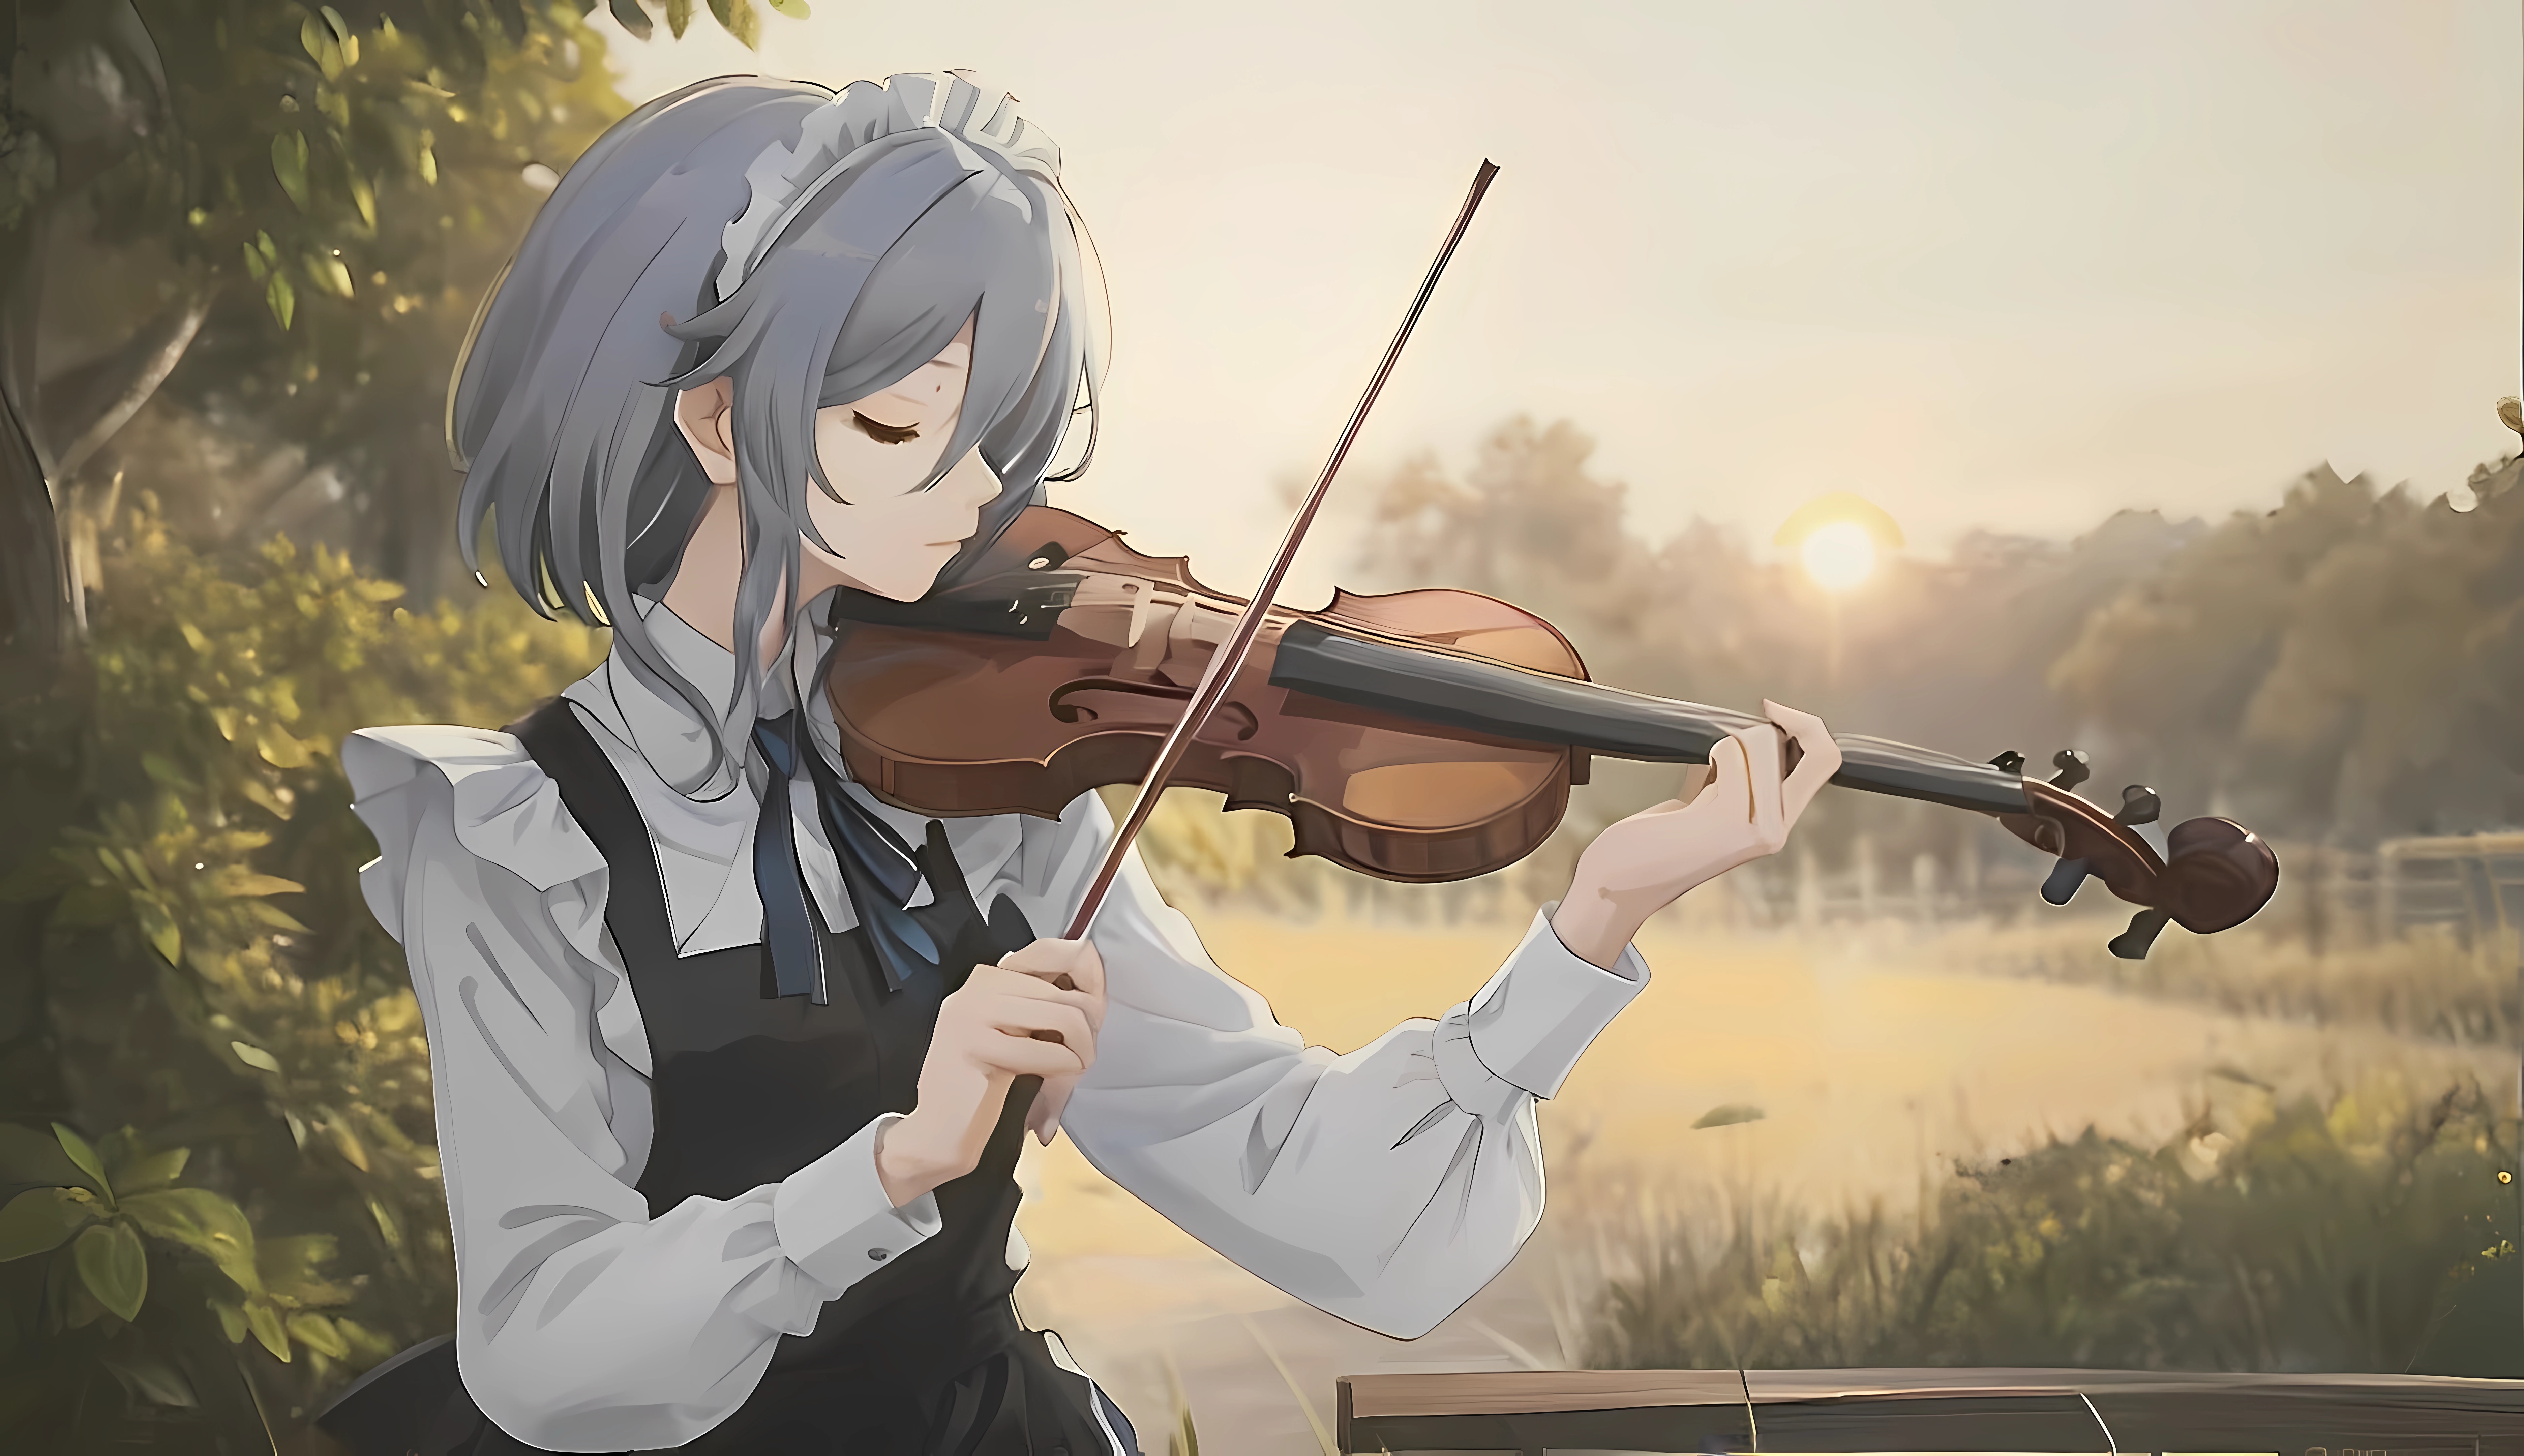 Anime 7488x4320 anime anime girls closed eyes violin musical instrument short hair trees sunset sunset glow bow tie standing leaves AI art maid maid outfit